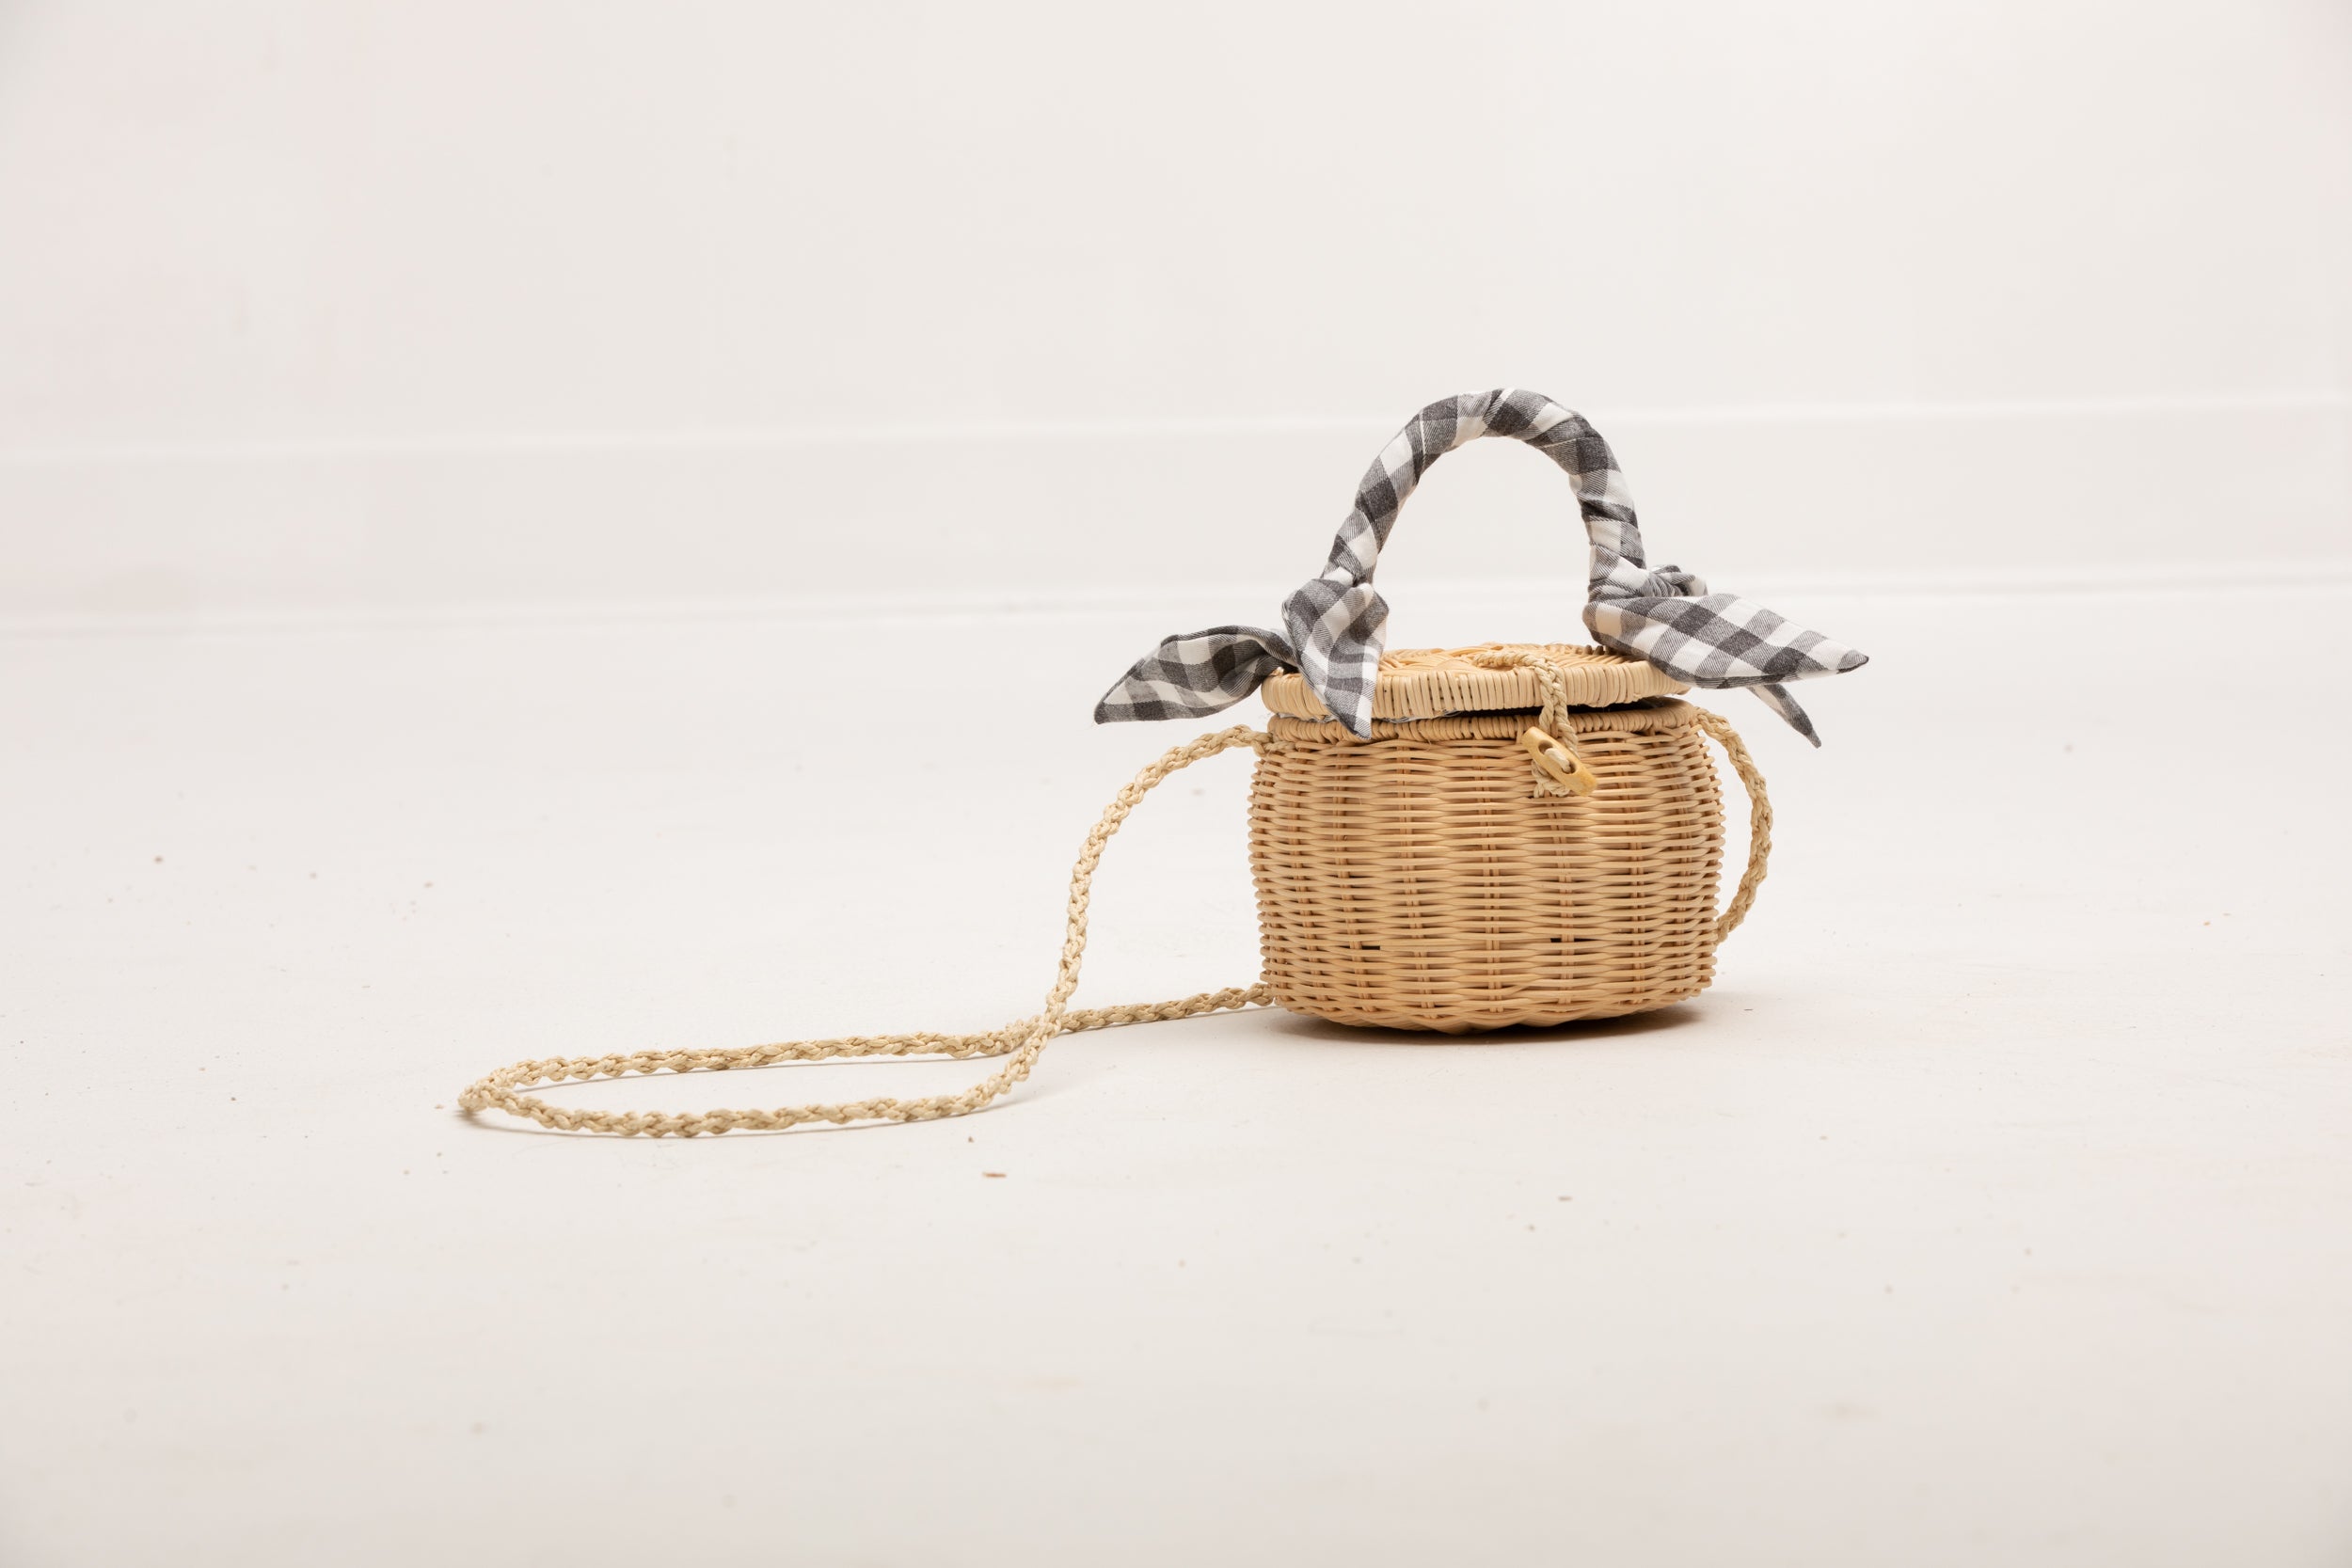 City Lights Collection-Picnic Wicker Hand Bag in Black